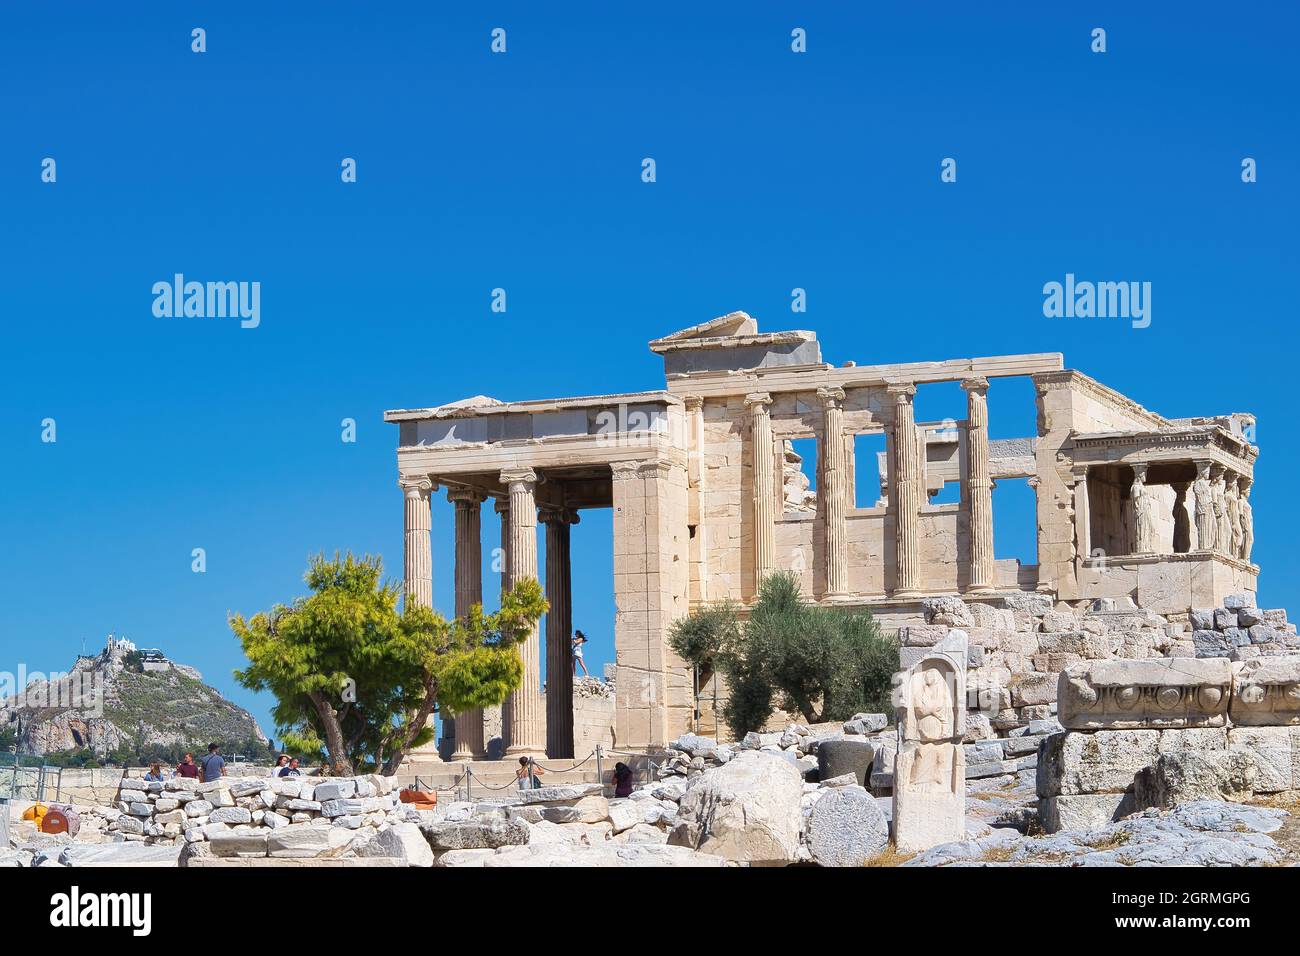 Erechtheion, with Porch of the maidens or Caryatids, Acropolis, Athens, Greece Stock Photo